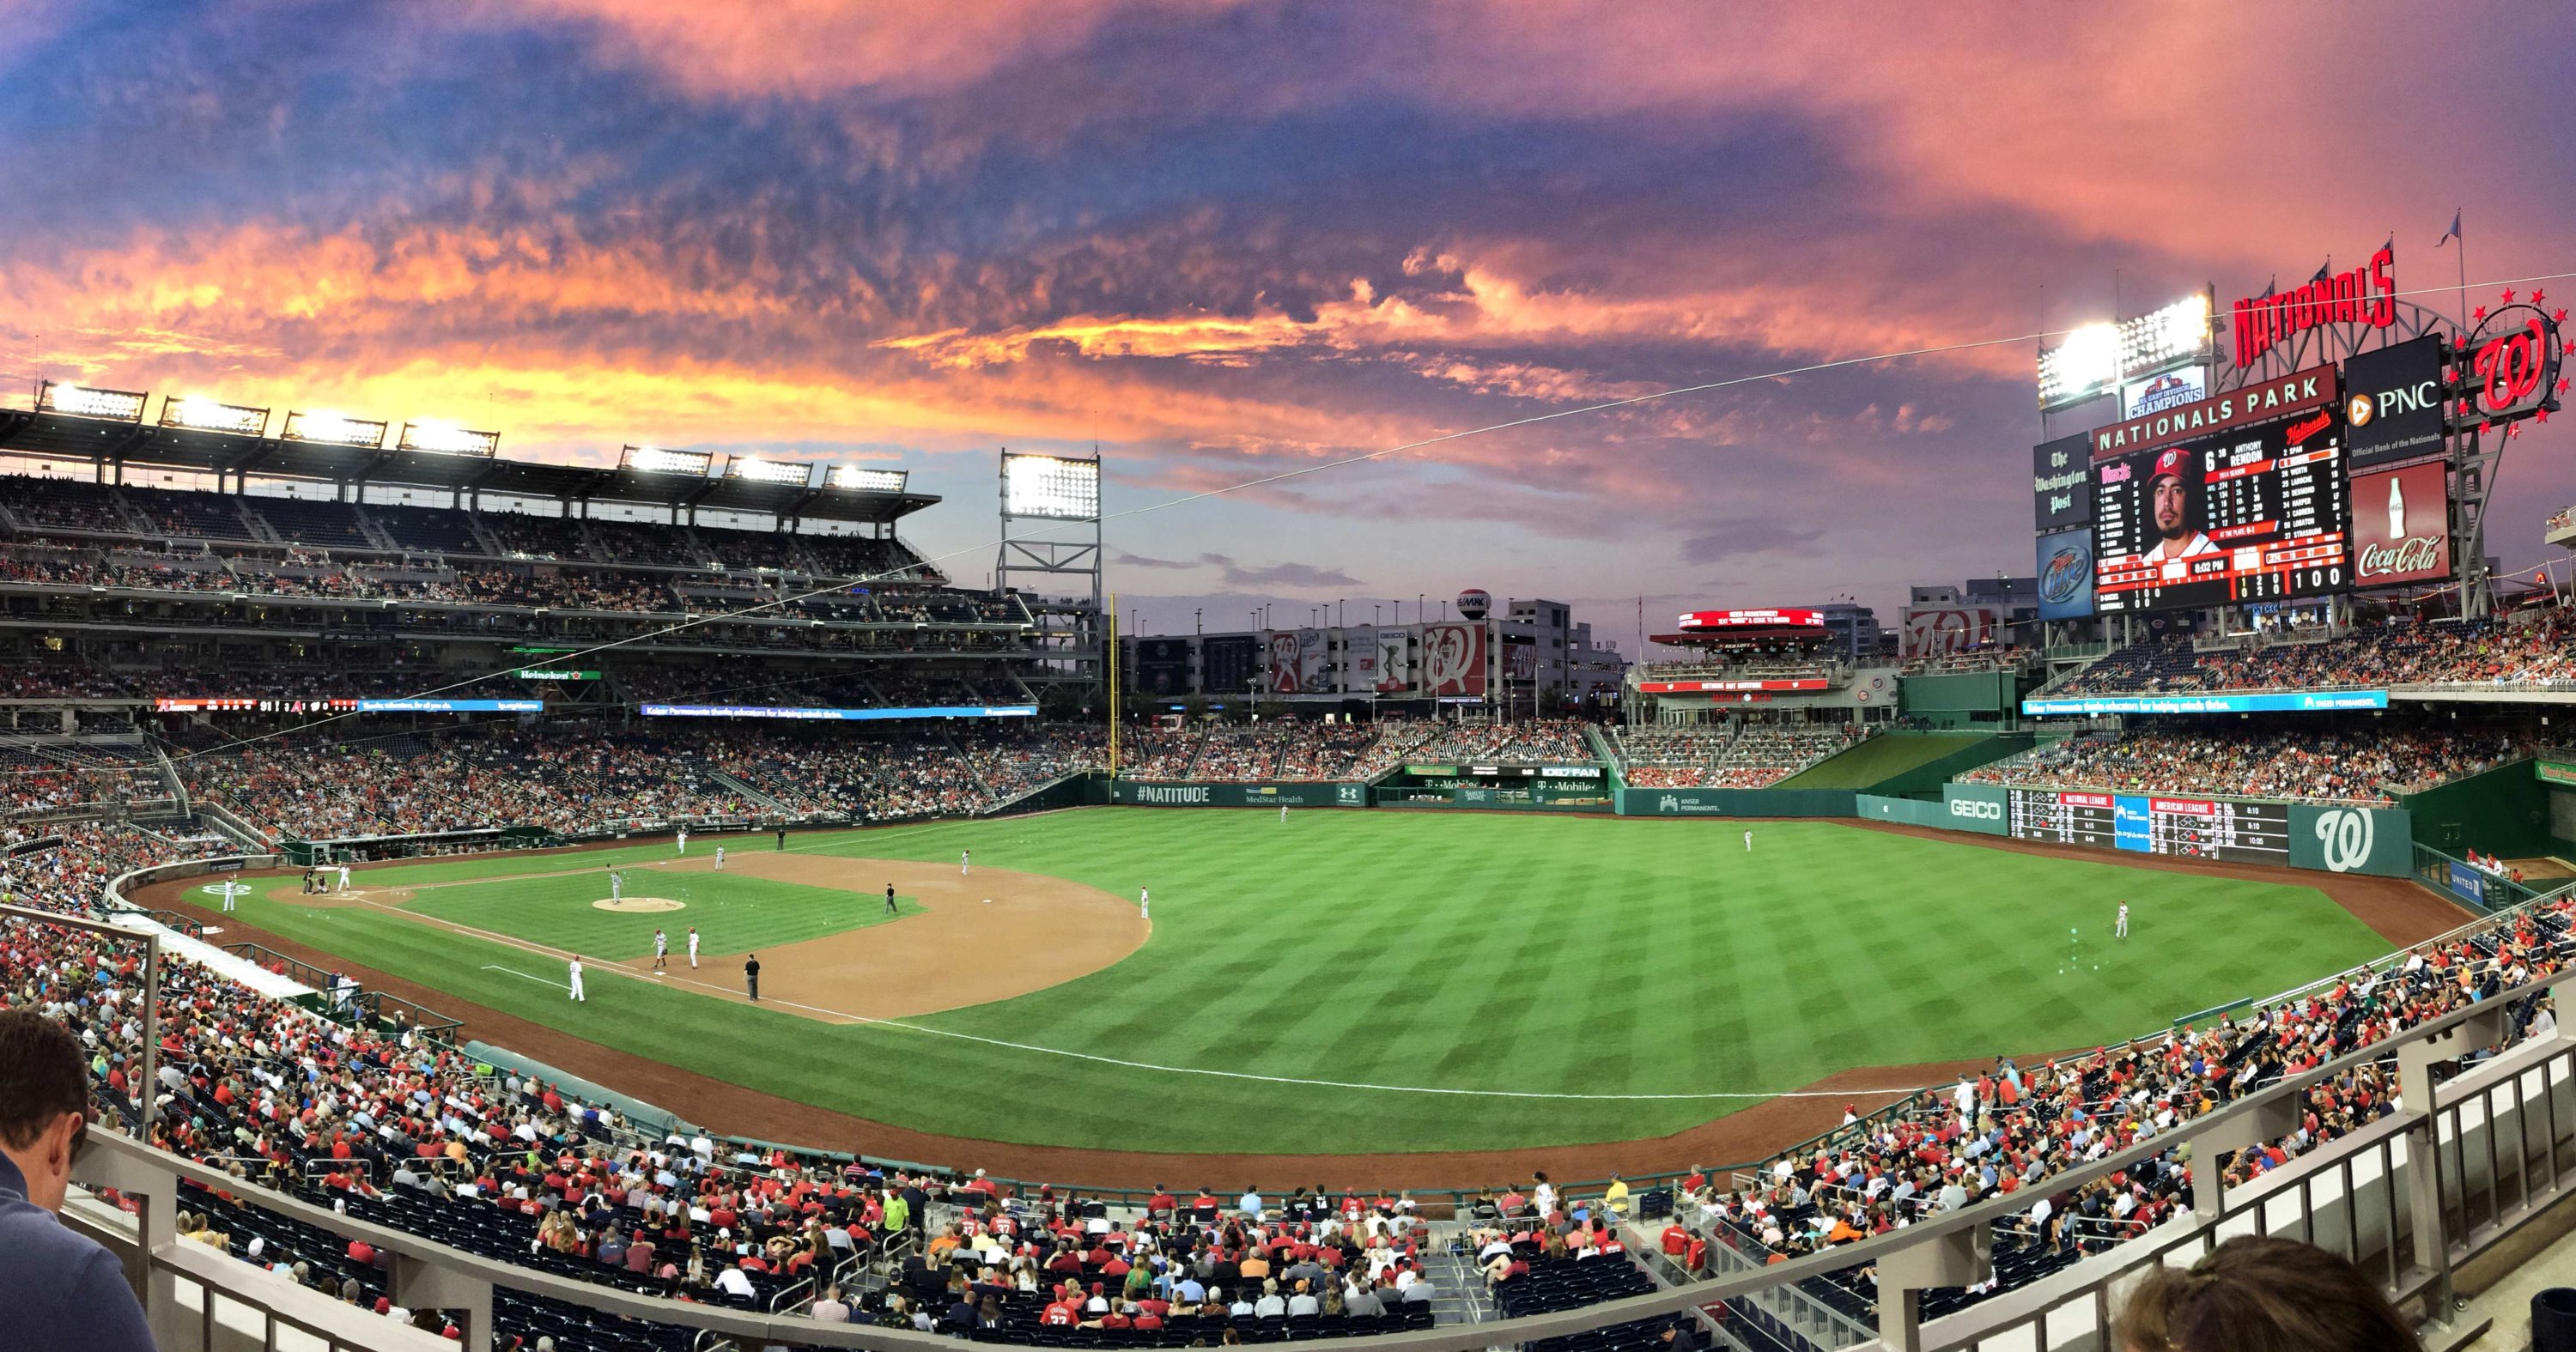 The Nationals May Be for Sale. Who Could Buy Them? - Washingtonian